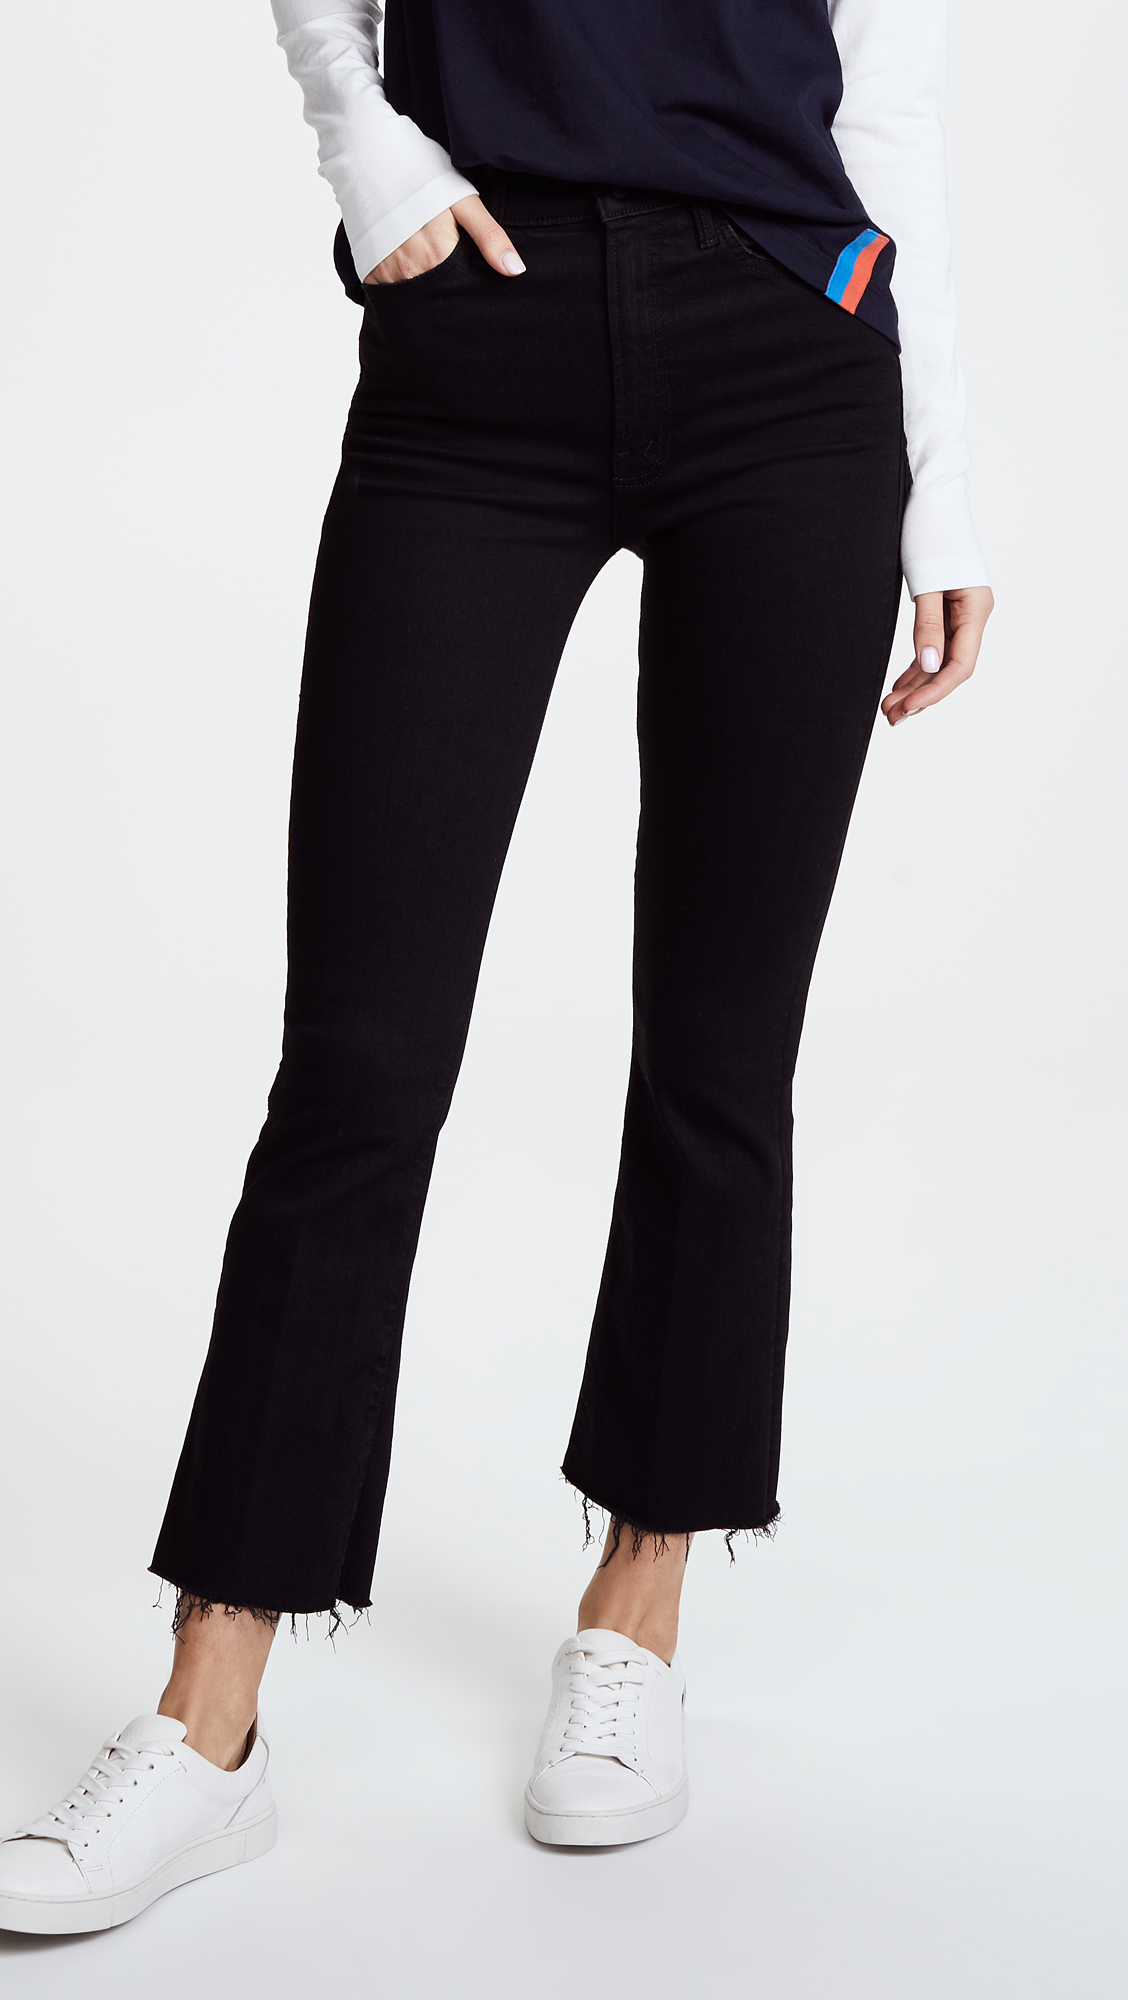 I'm Shopbop's Head Buyer—These Jeans Are In for Fall | Who What Wear